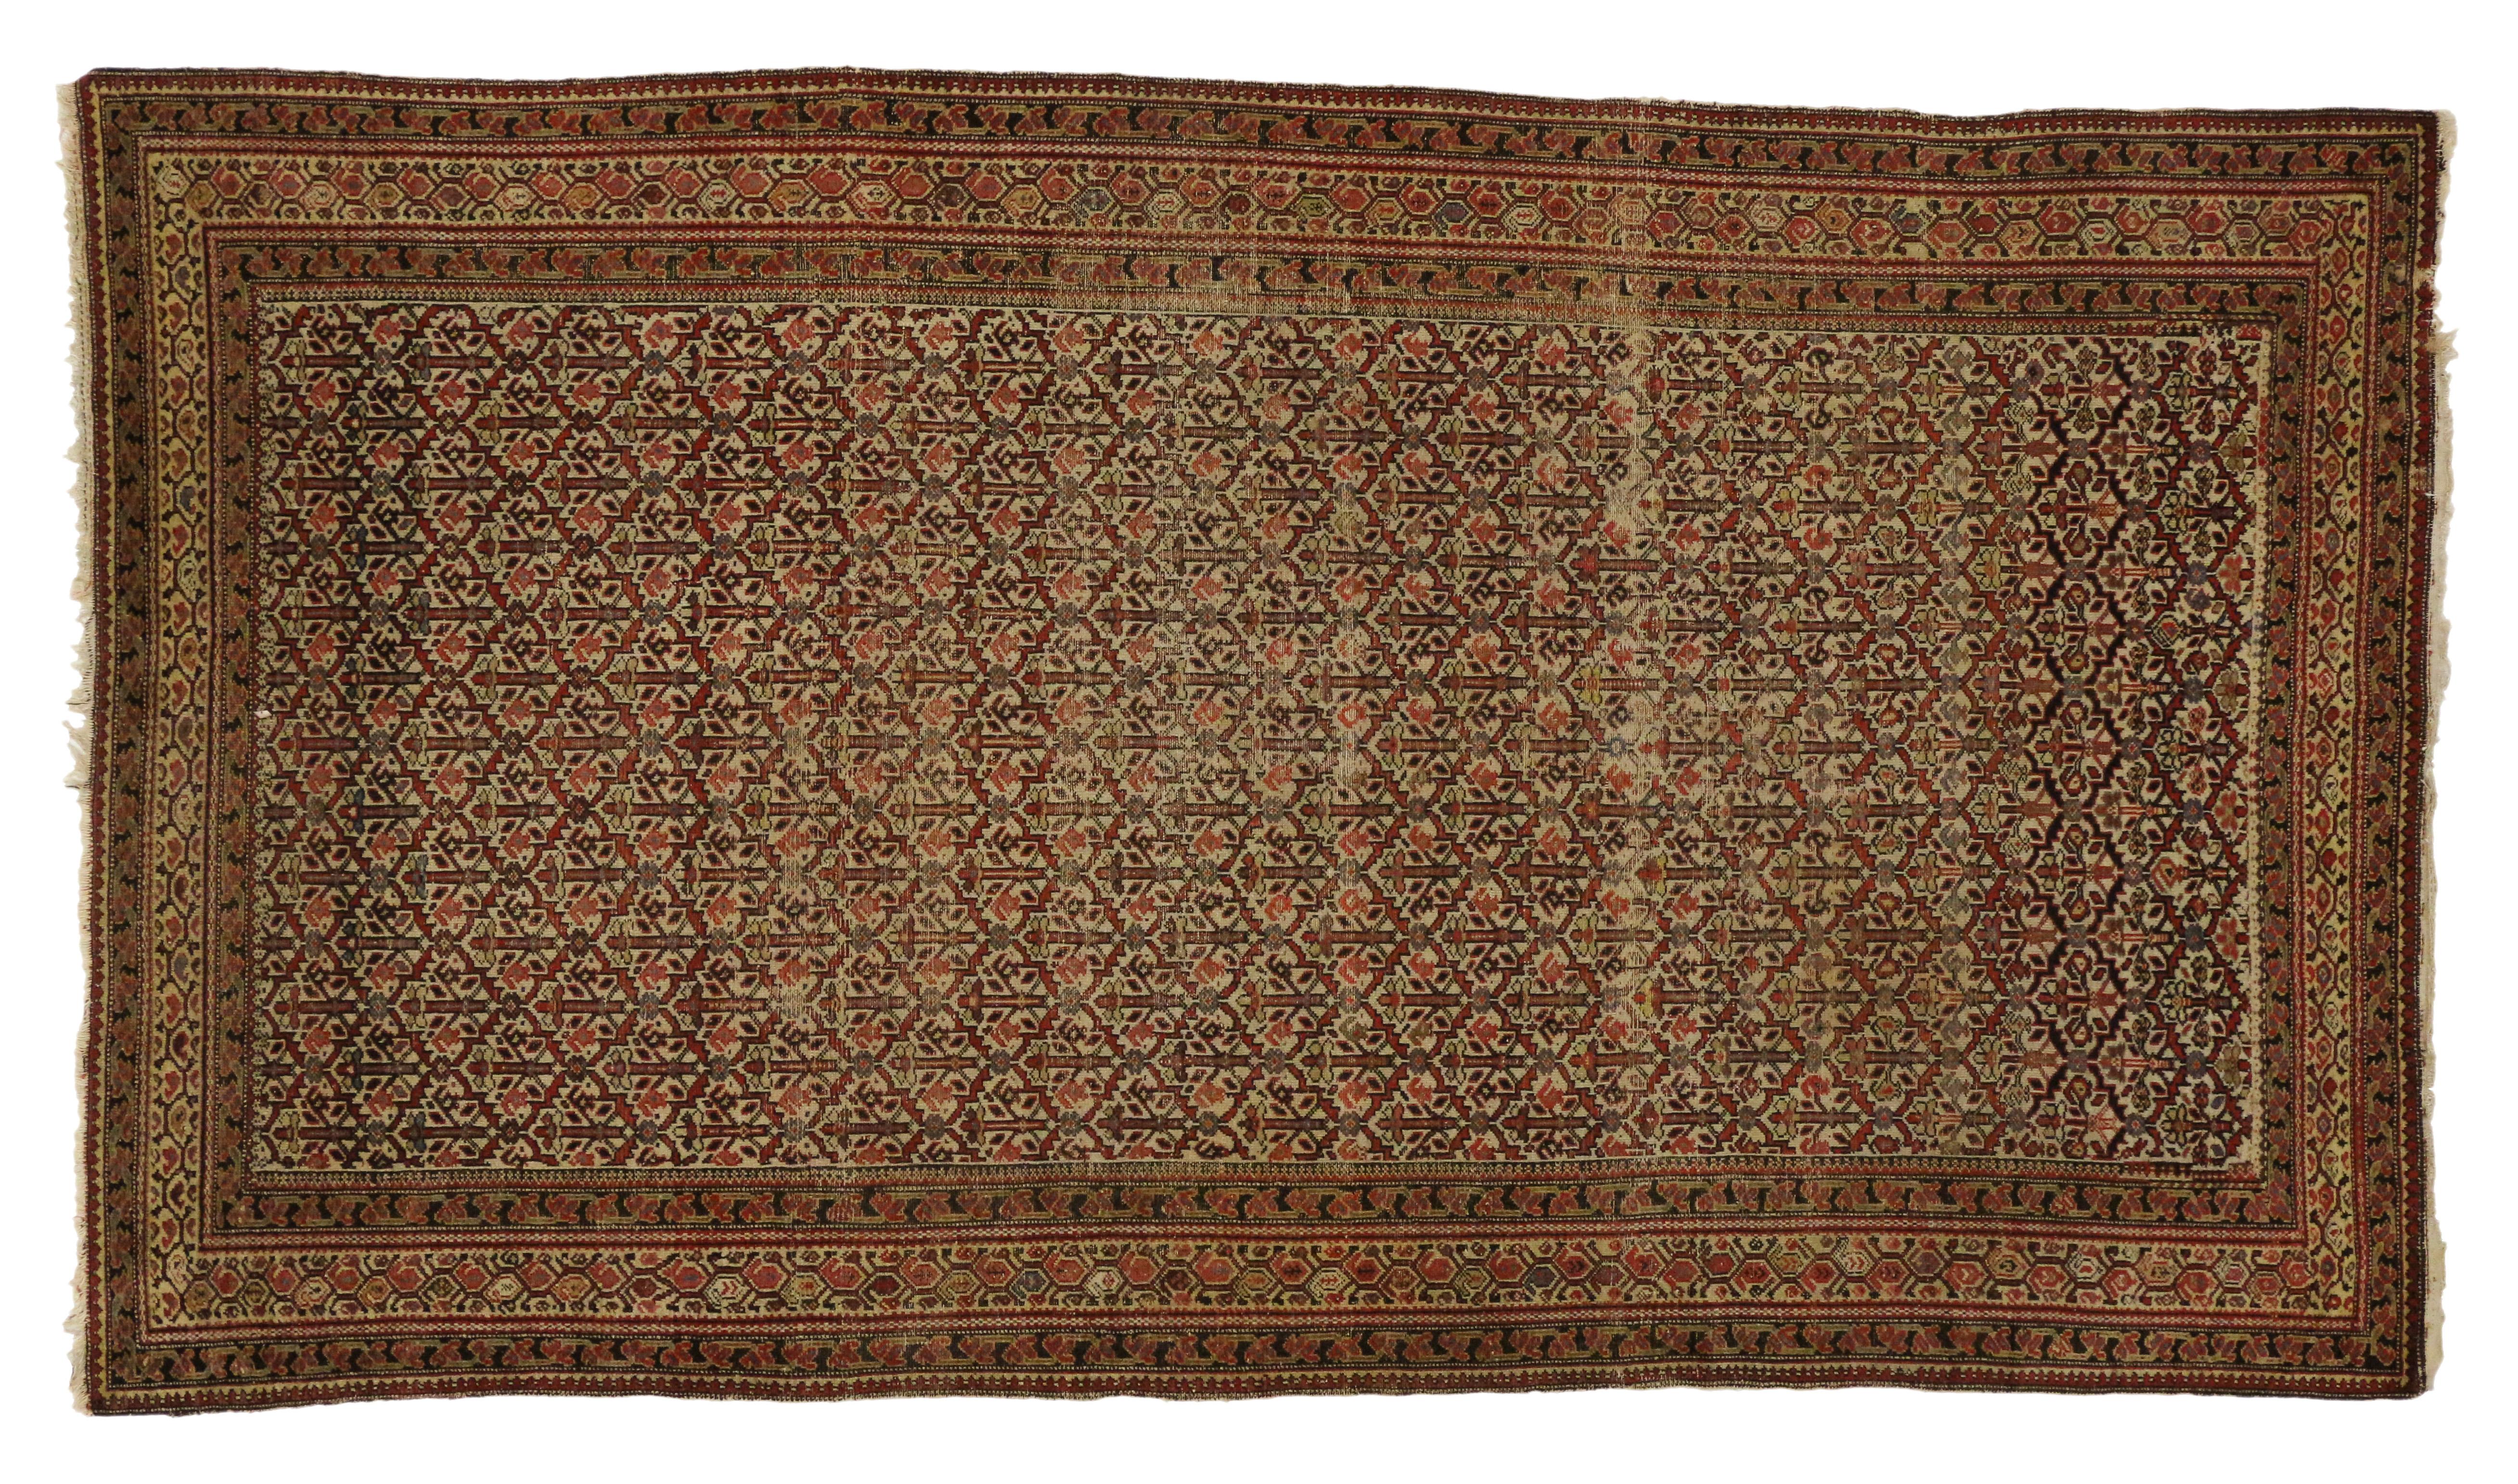 20th Century Distressed Antique Malayer Persian Area Rug with Industrial Rustic Style For Sale